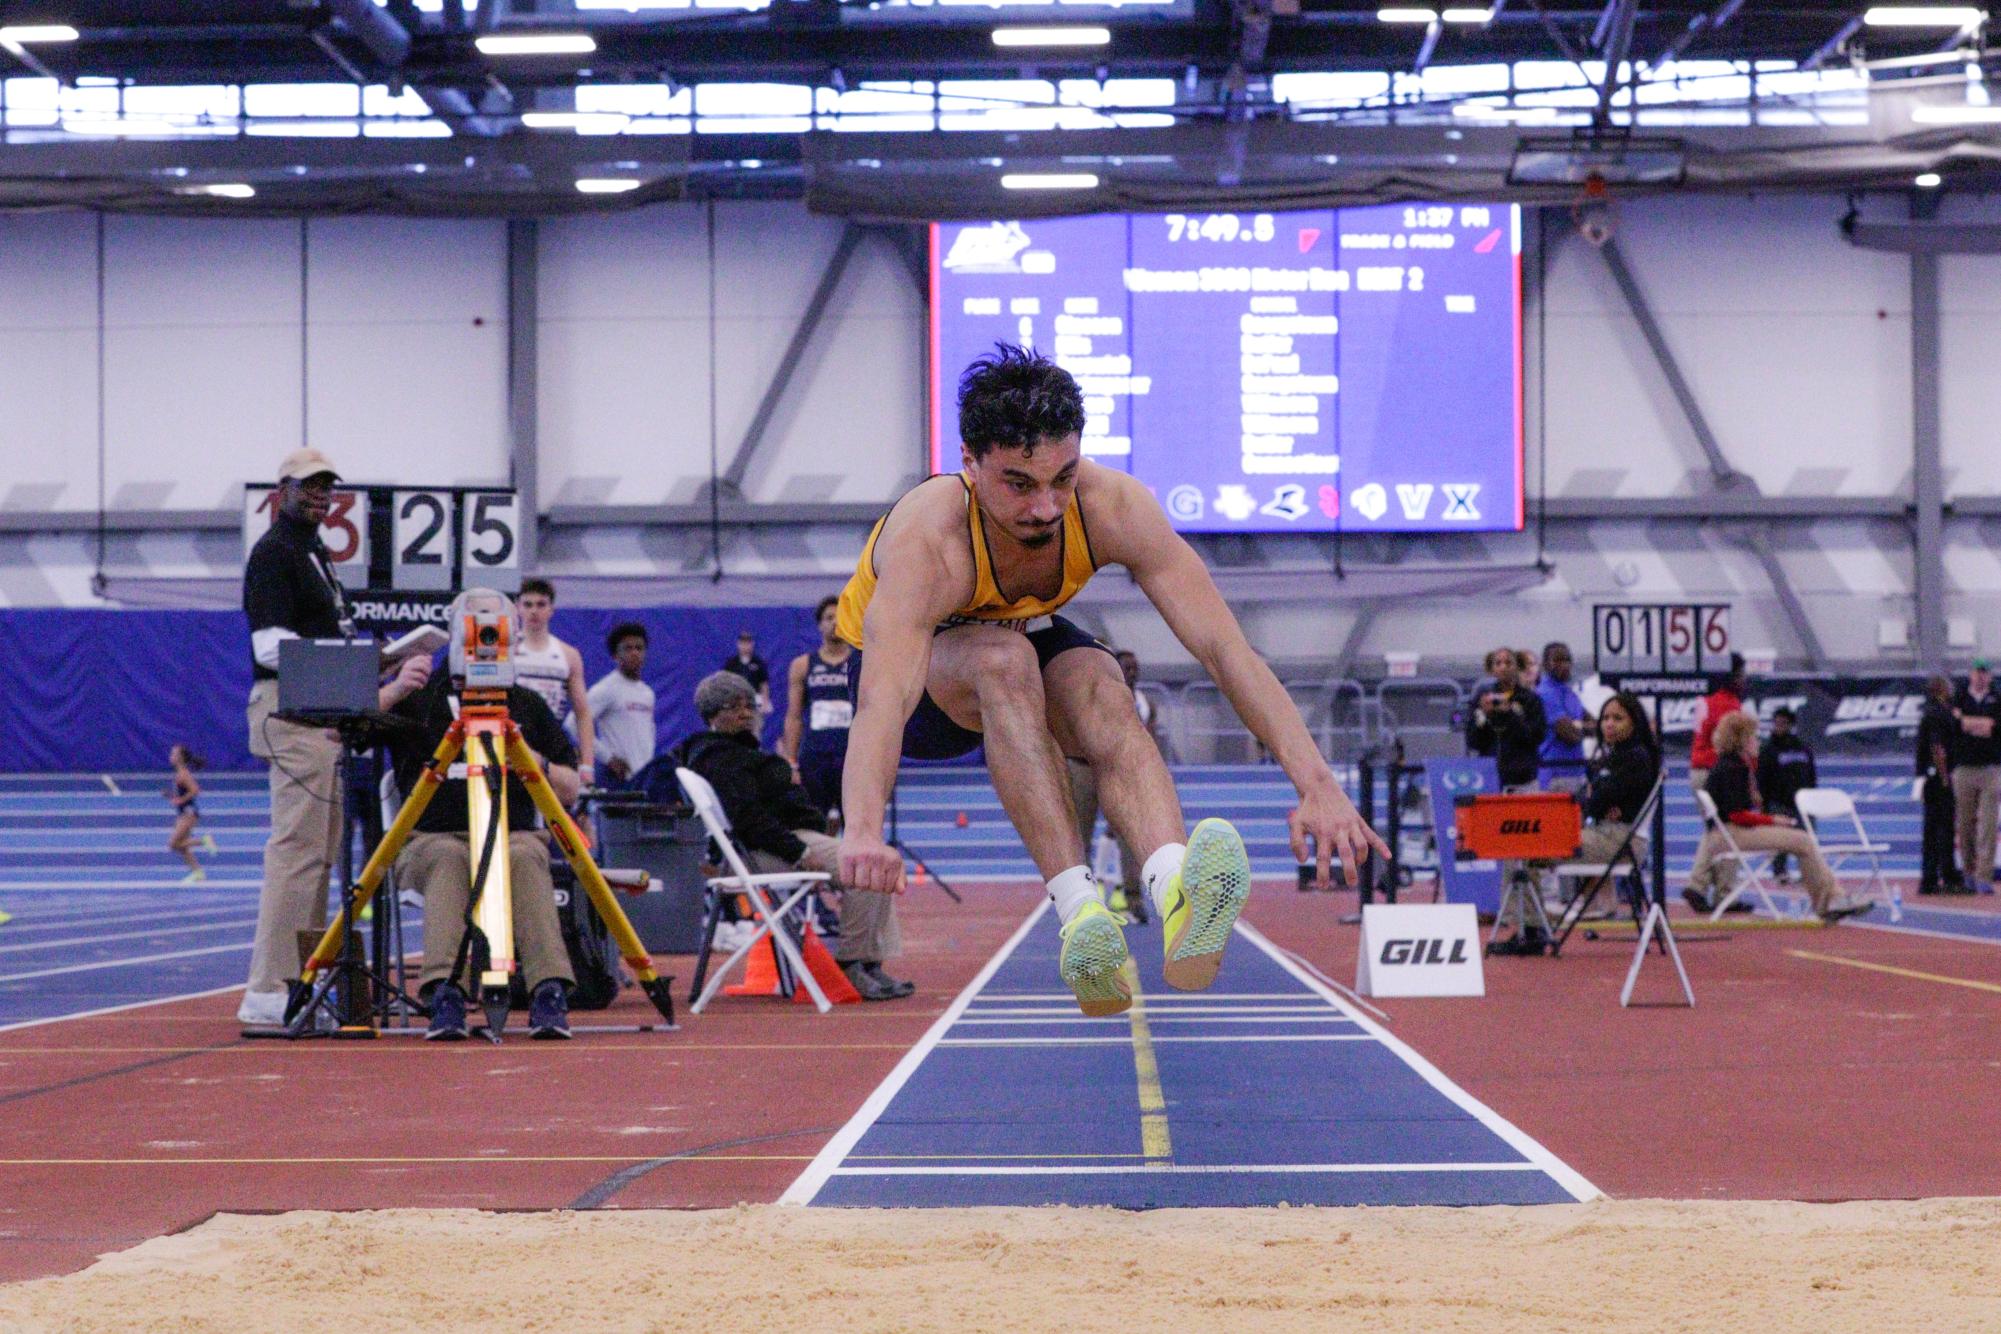 Marquette Track & Field Athletes Shine at John Tierney Classic in Hometown Milwaukee Event